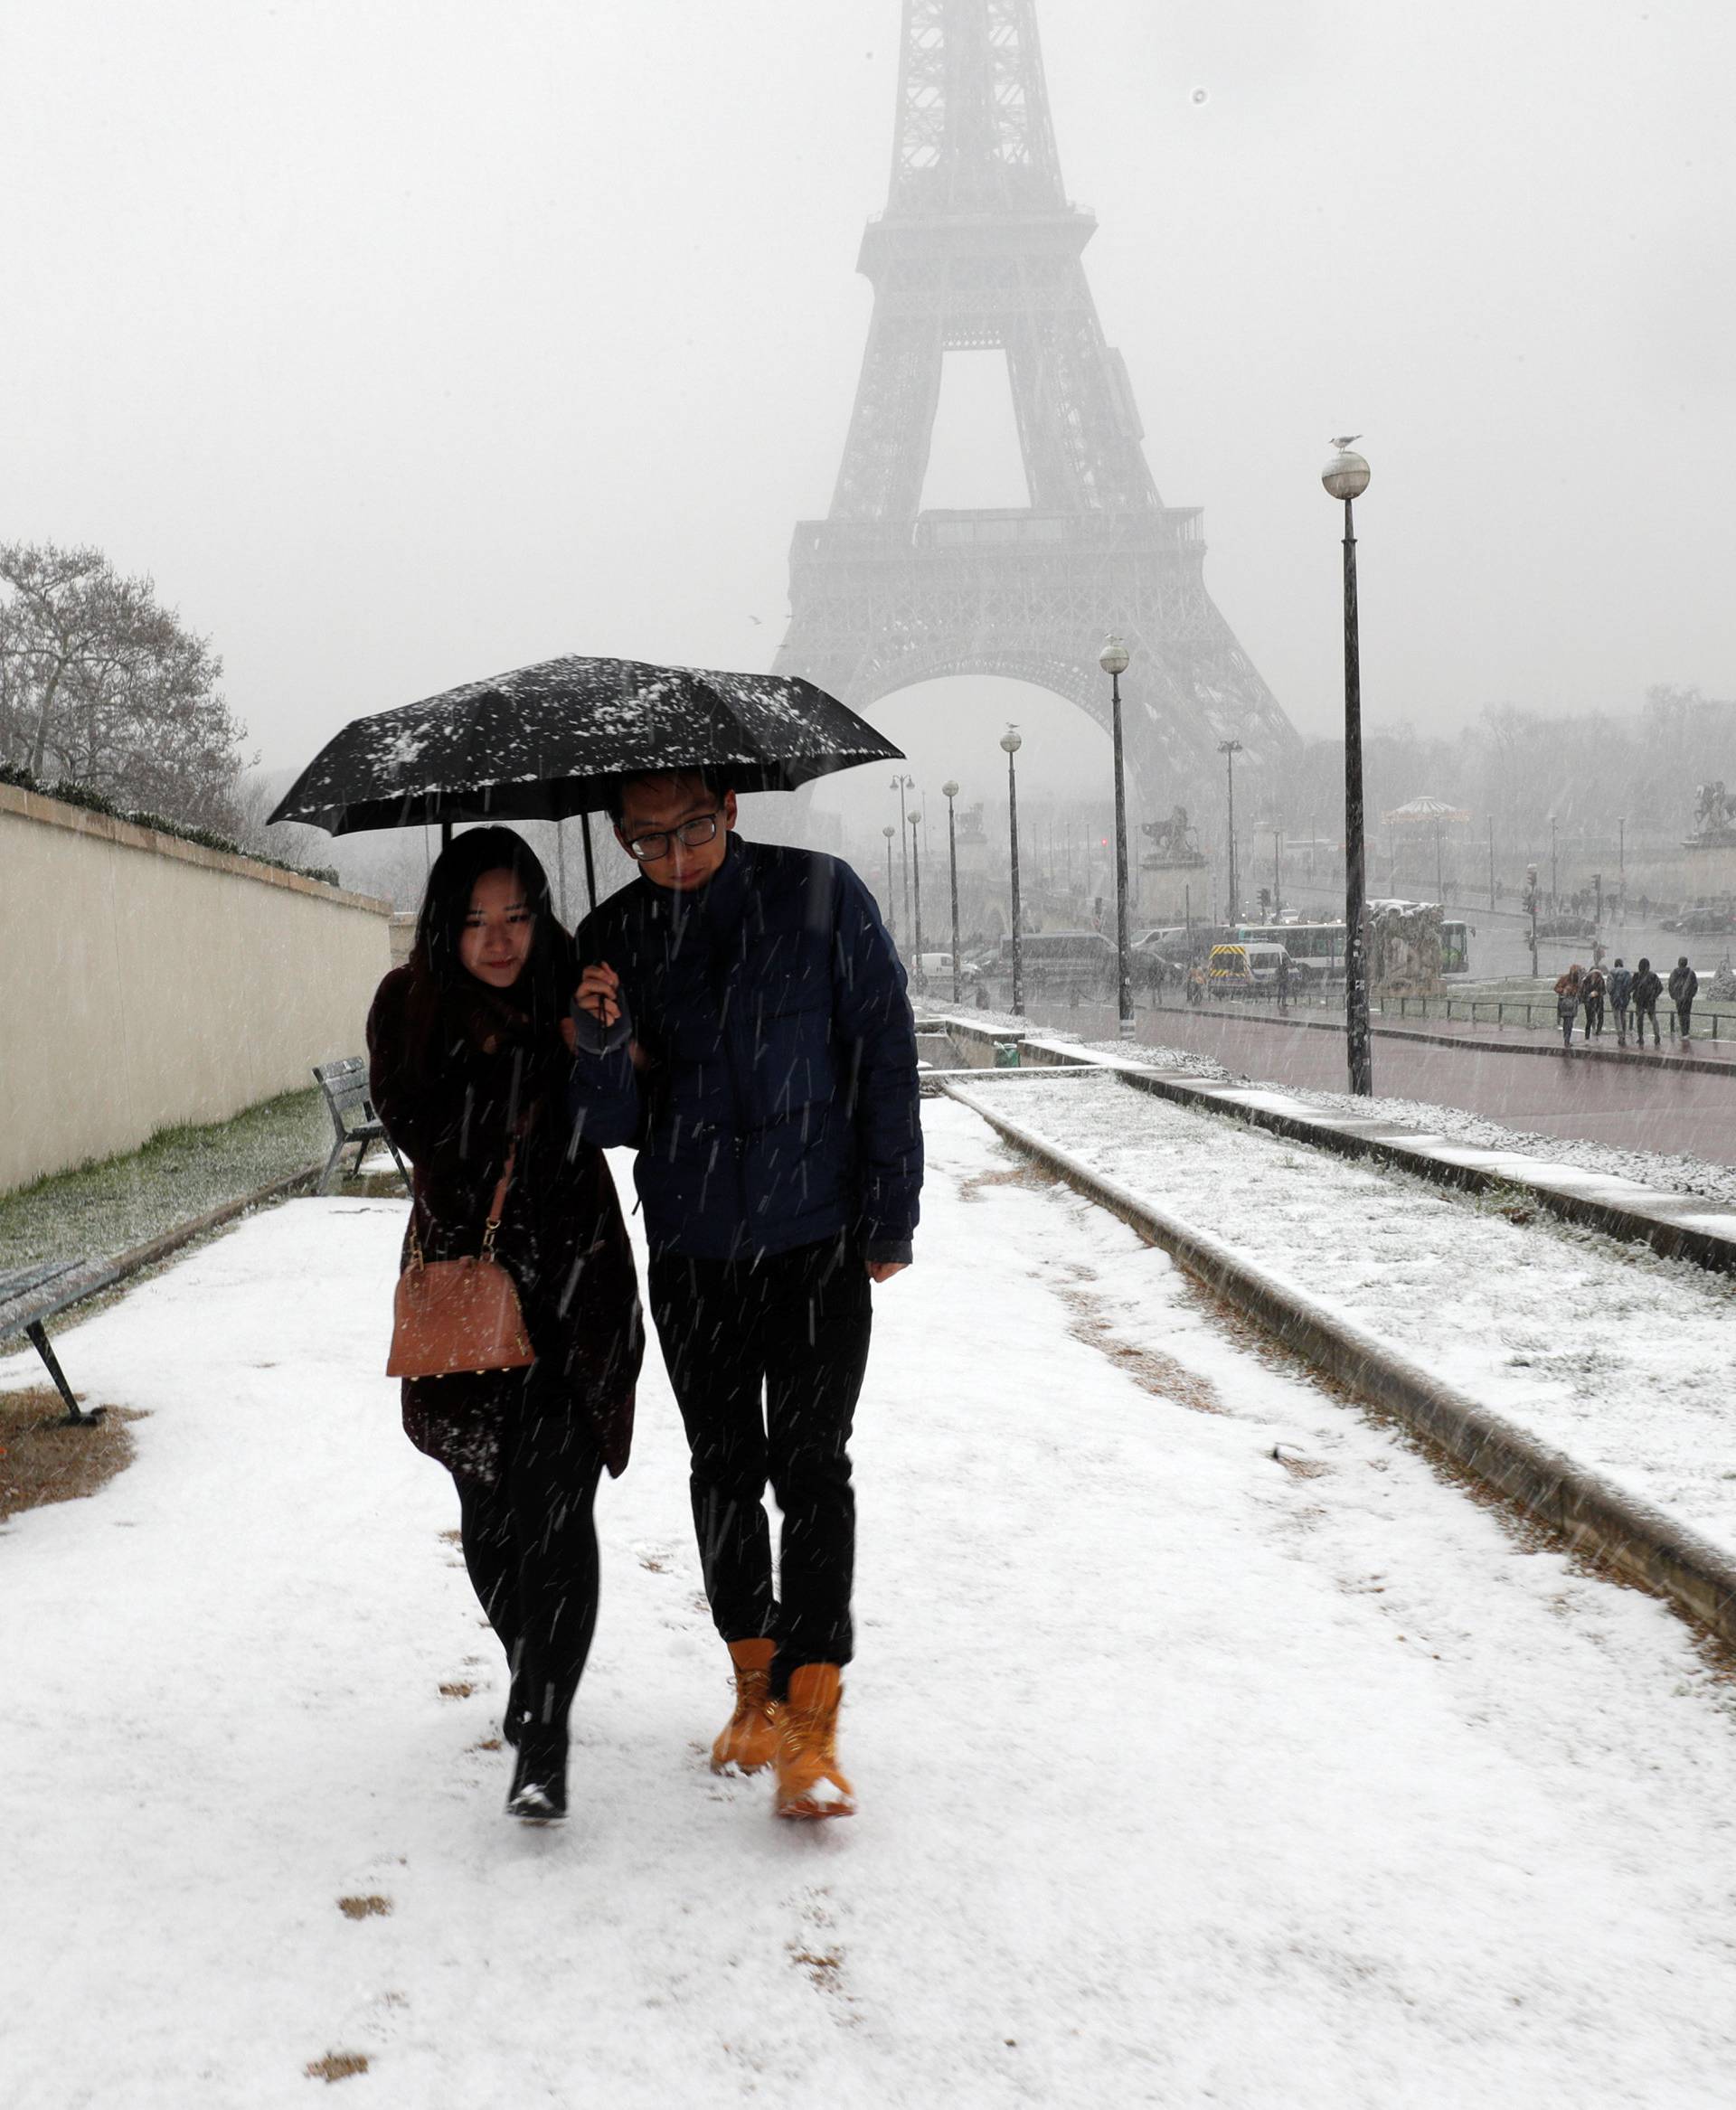 Tourists hold an umbrella as they walk on a snow-covered path towards the Eiffel Tower in Paris, as winter weather with snow and freezing temperatures arrive in France